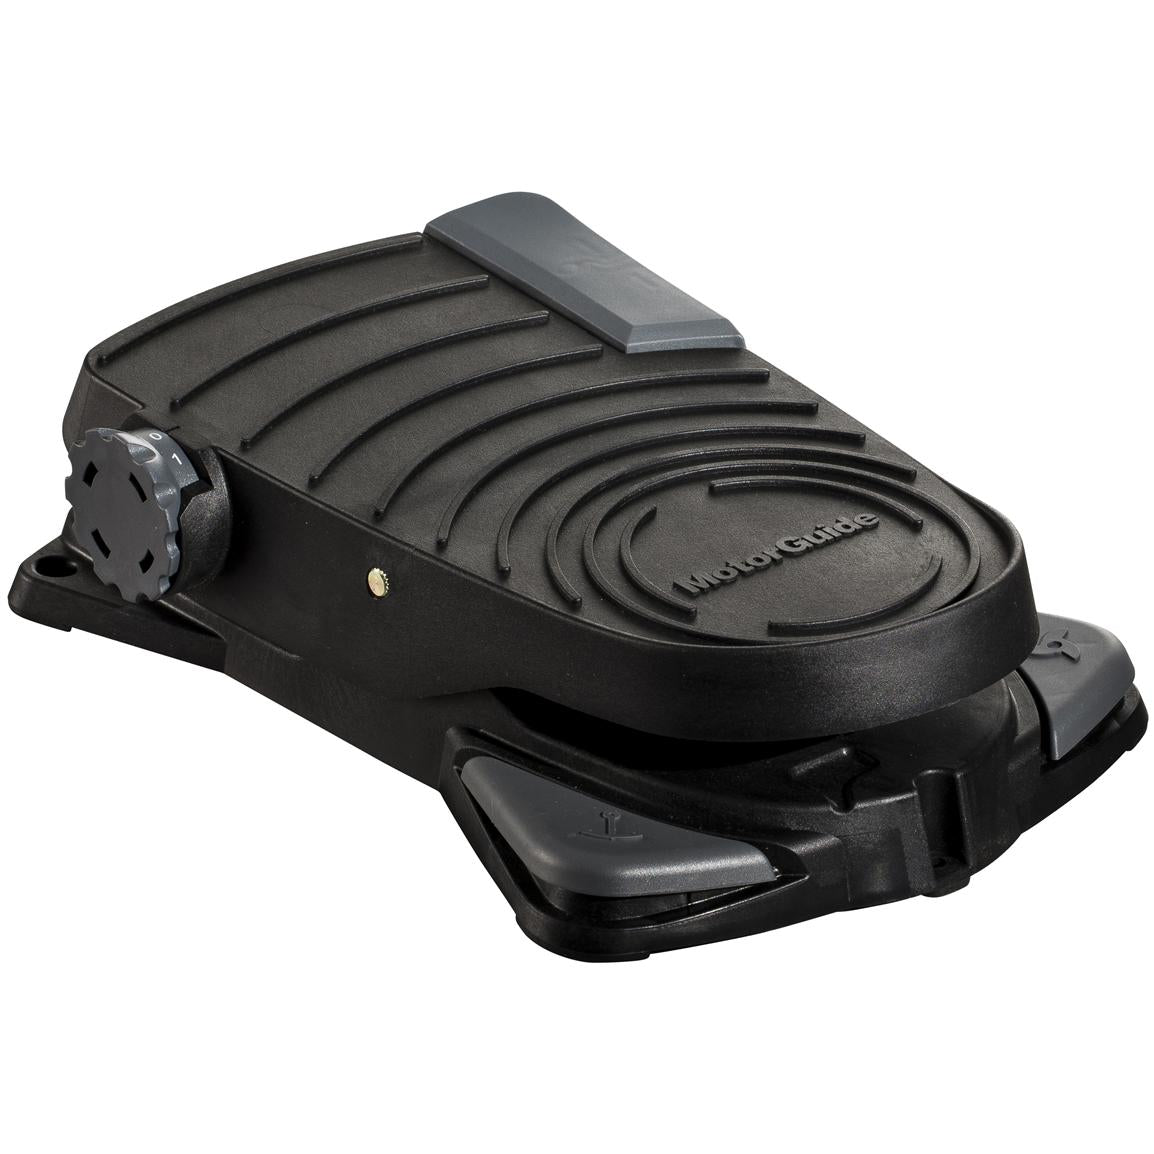 Motor Guide Wireless Foot Pedal for Xi3 and Xi5 - waves-overseas